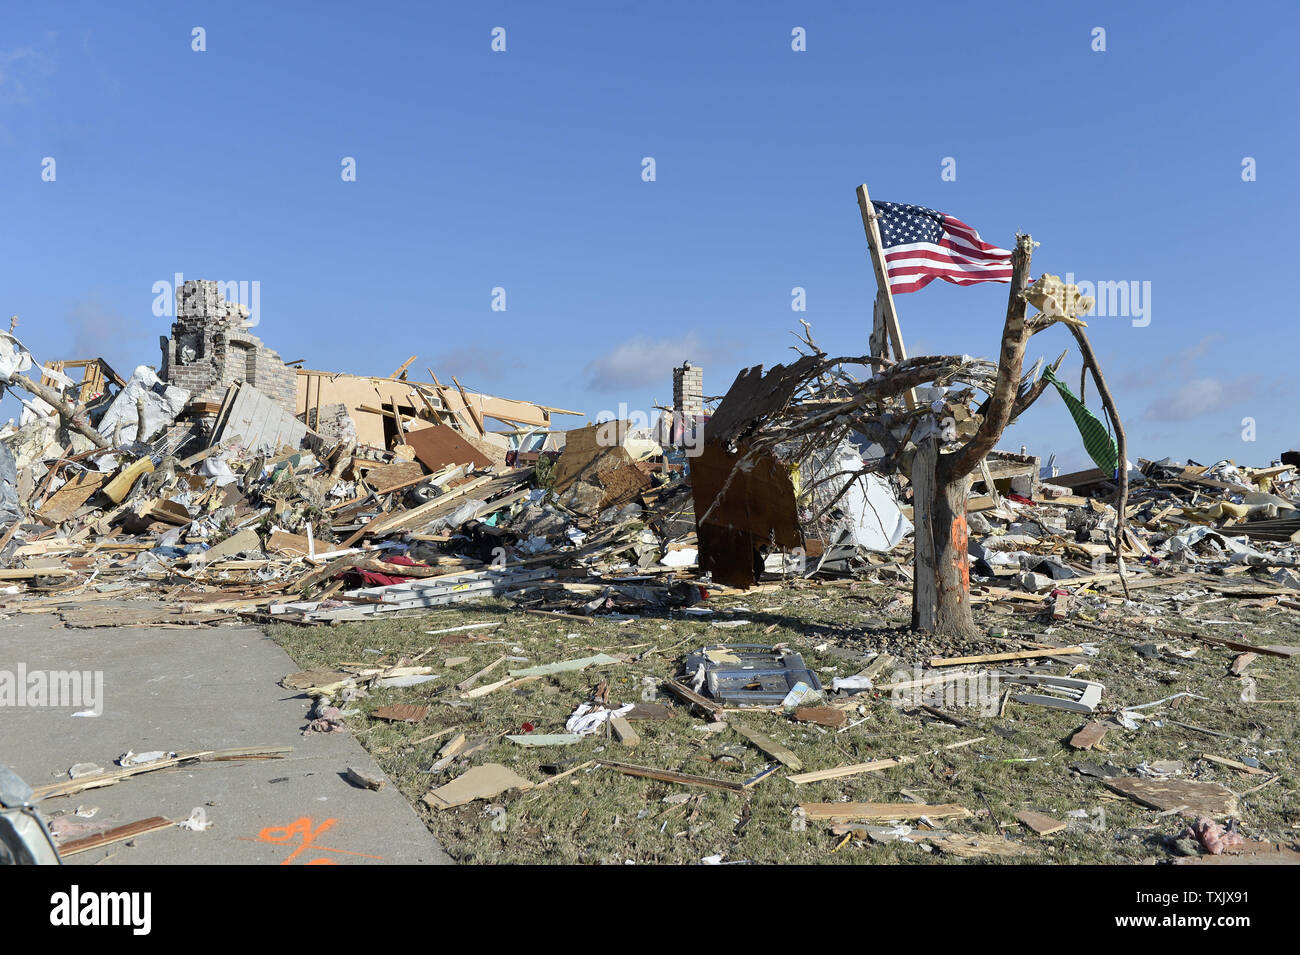 An American flag flies in front of a destroyed house in Washington, Illinois on November 18, 2013. Six people died and hundreds of homes were destroyed in Illinois as 81 tornadoes were sighted on November 17 throughout 12 midwest states including the EF4 tornado that struck Washington, Illinois.     UPI/Brian Kersey.     UPI/Brian Kersey Stock Photo